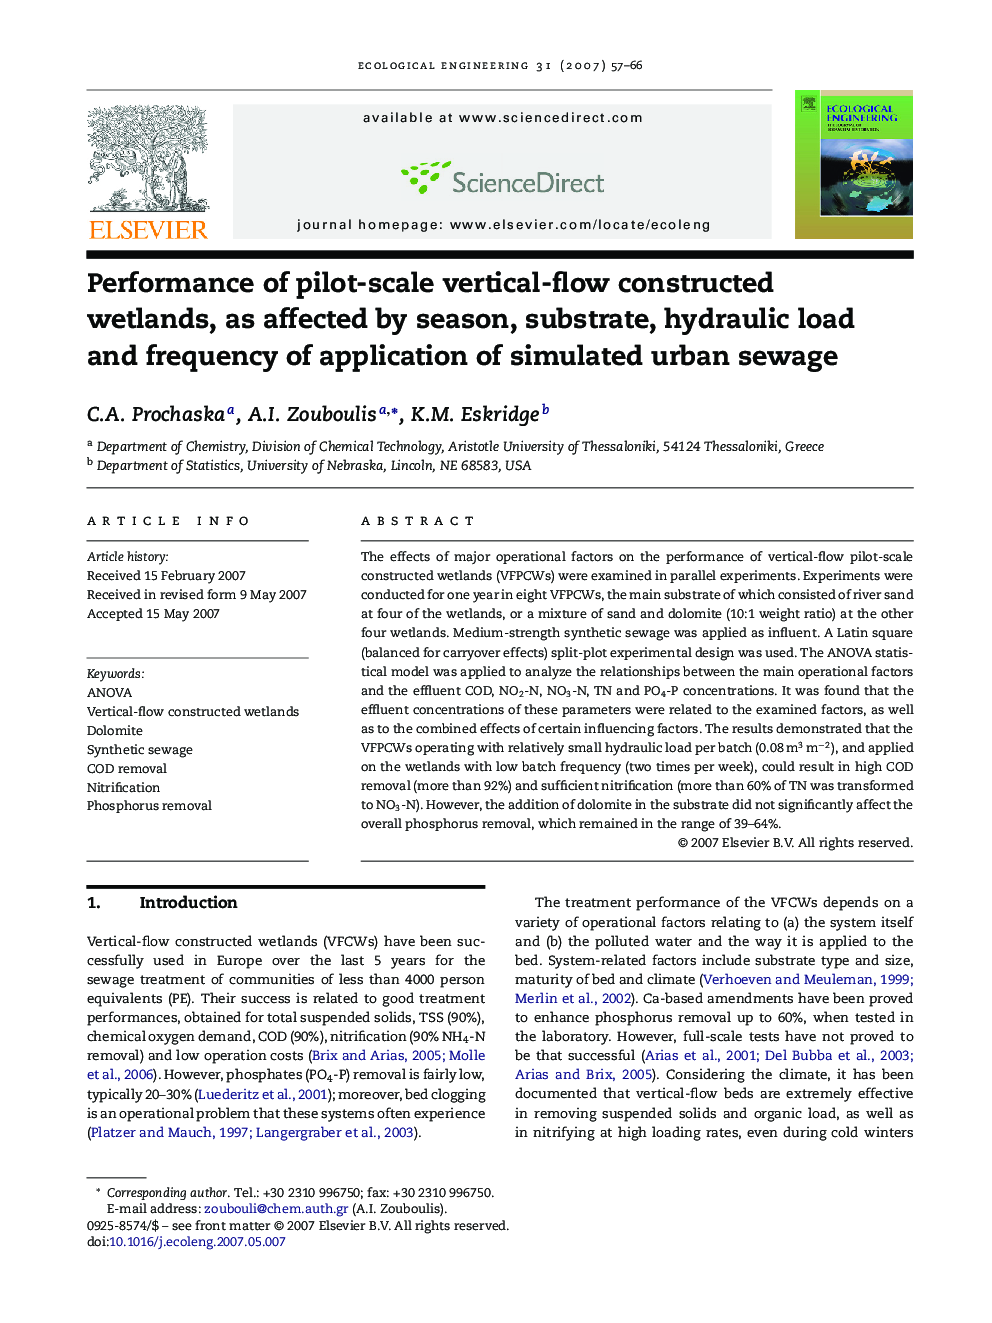 Performance of pilot-scale vertical-flow constructed wetlands, as affected by season, substrate, hydraulic load and frequency of application of simulated urban sewage